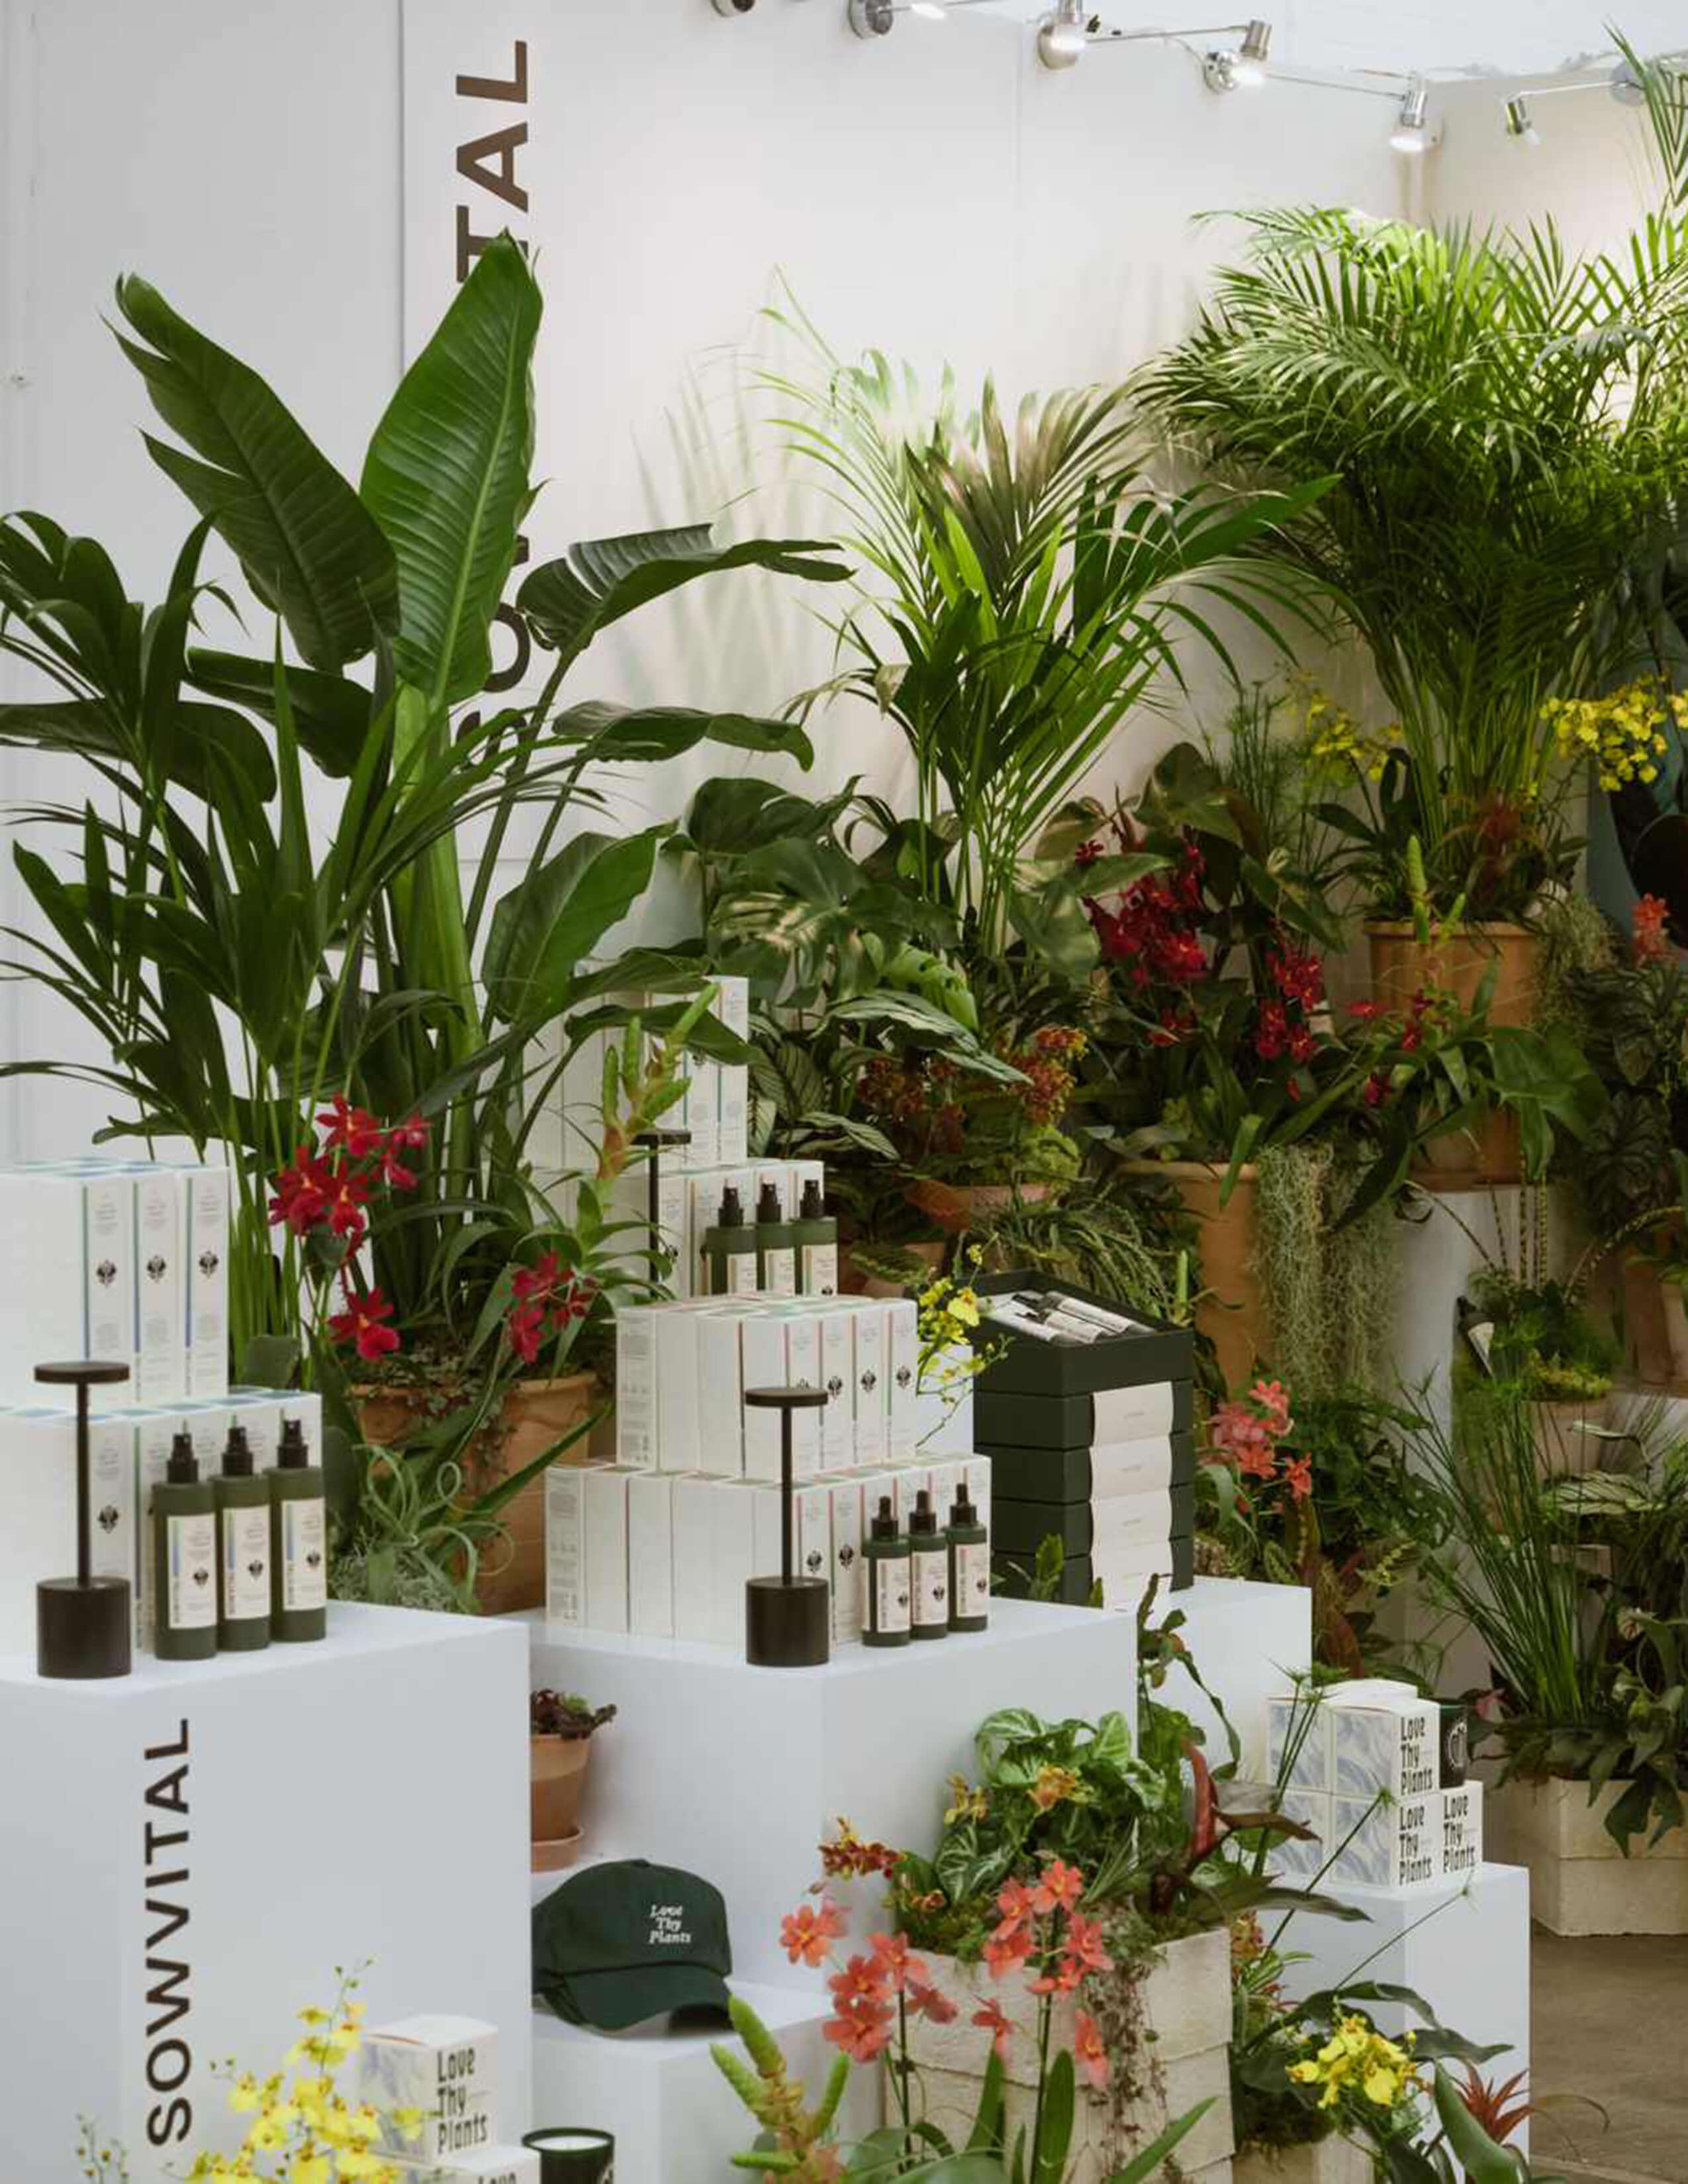 The Sowvital house plant products display with caps, mugs and an extensive collection of different plants/flowers.